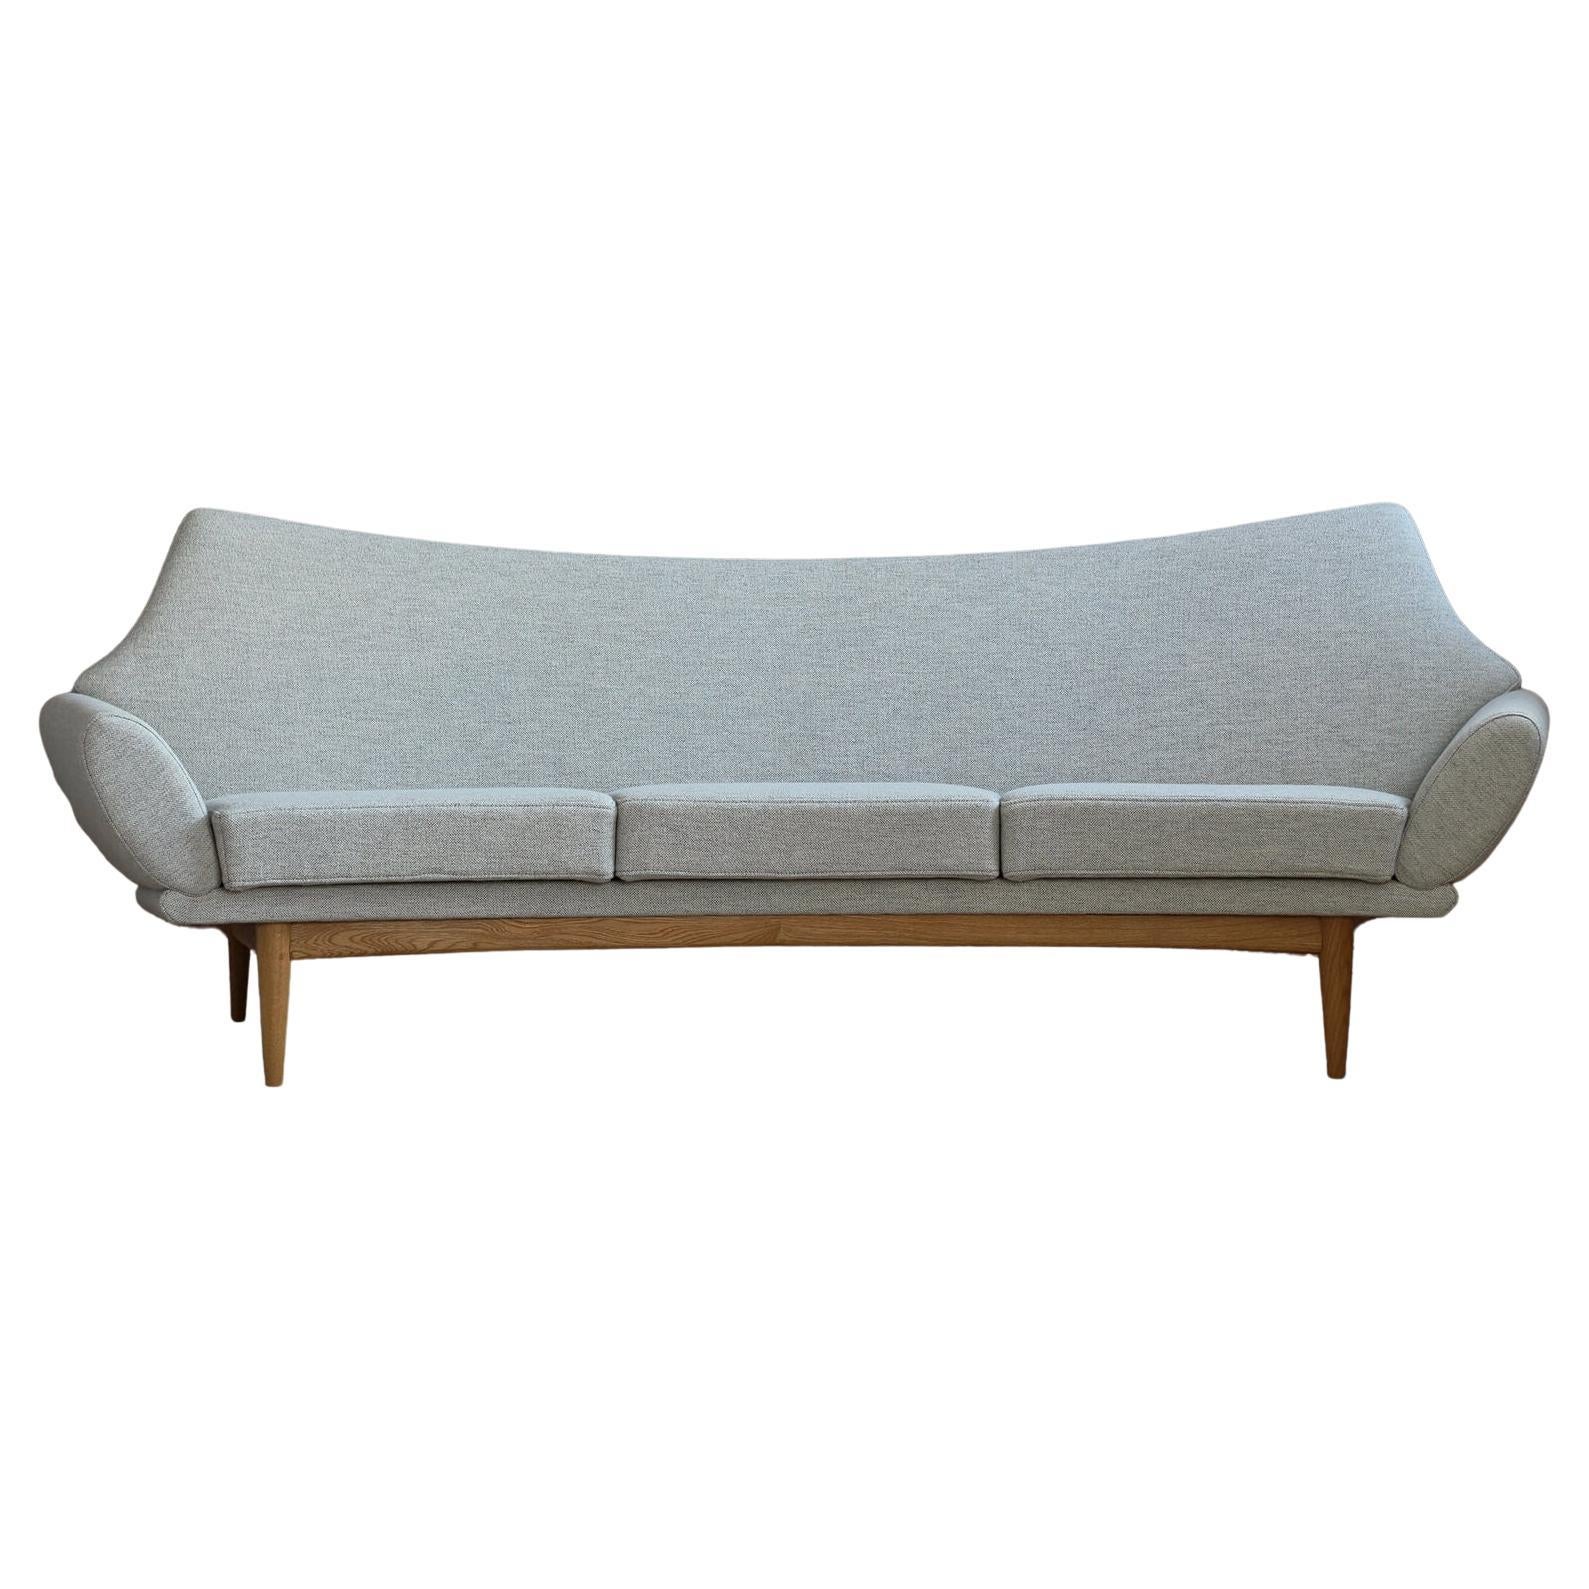 Johannes Andersen Sofa for AB Trensums Reupholstered in Kvadrat Fabric, 1950s